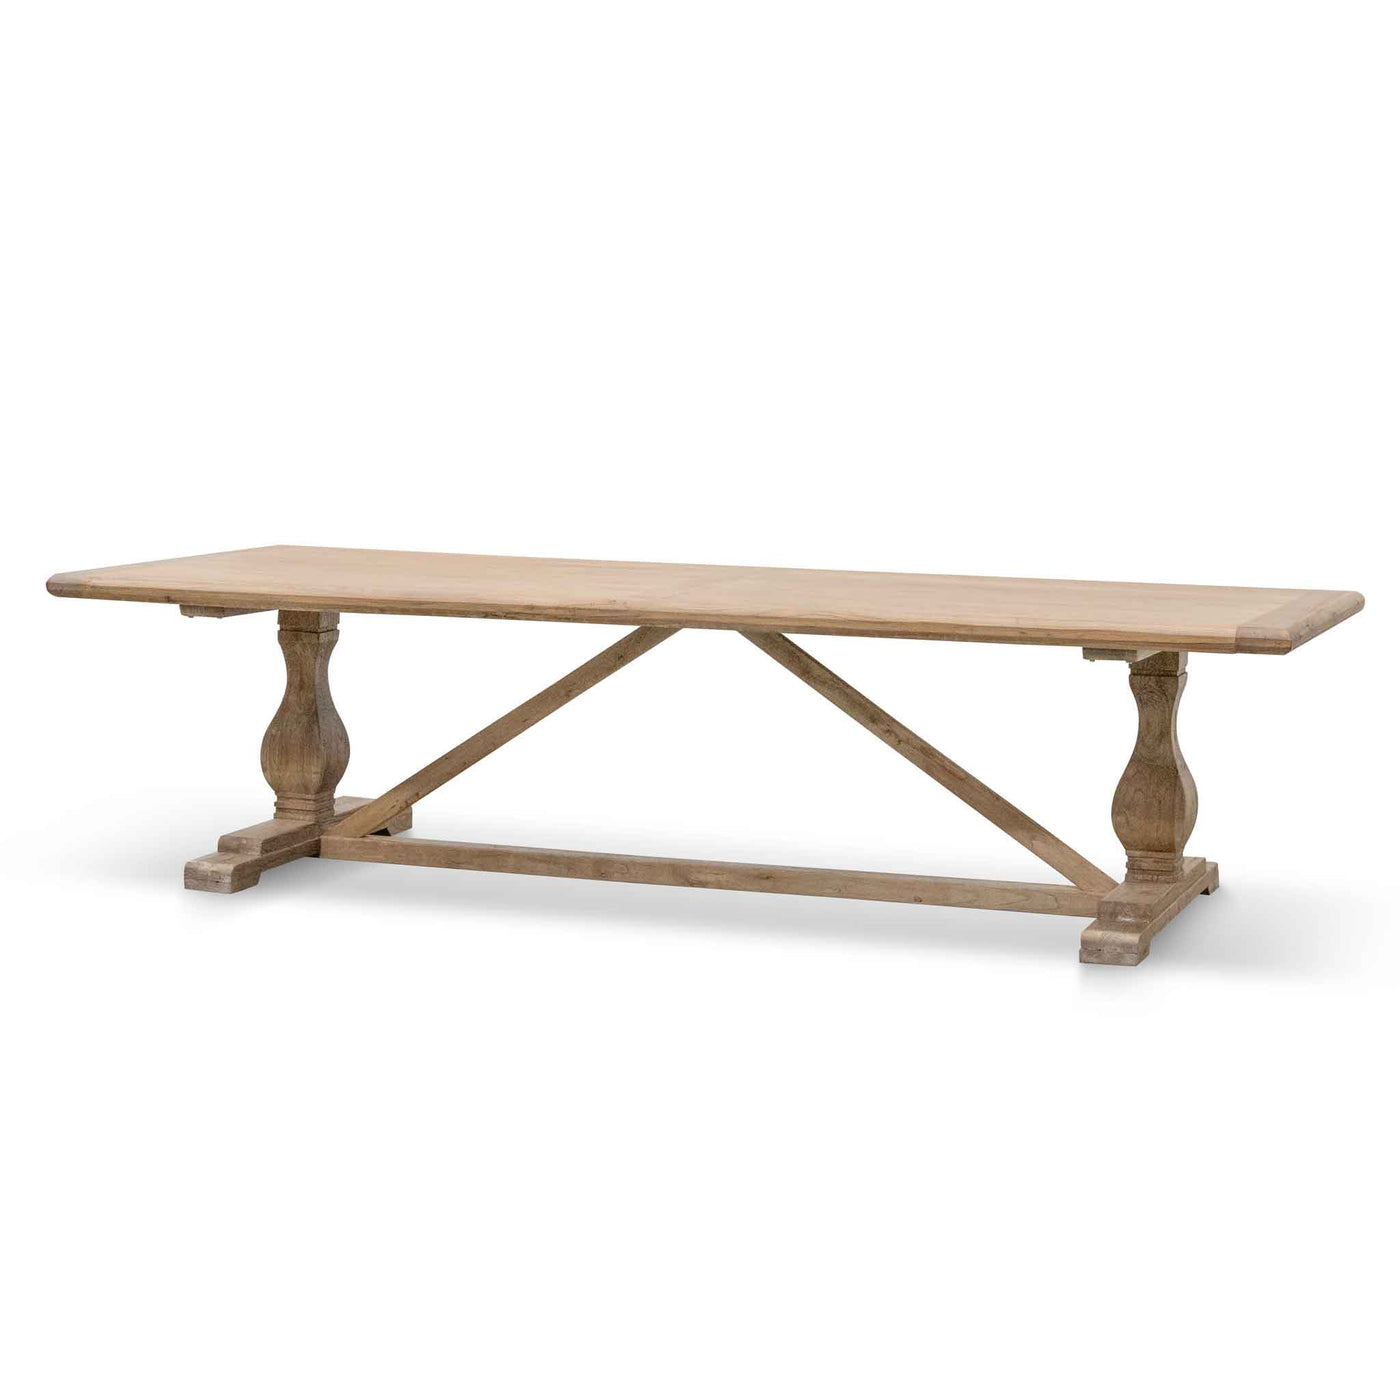 Dining Table 3m - Rustic Natural - 120cm (W)